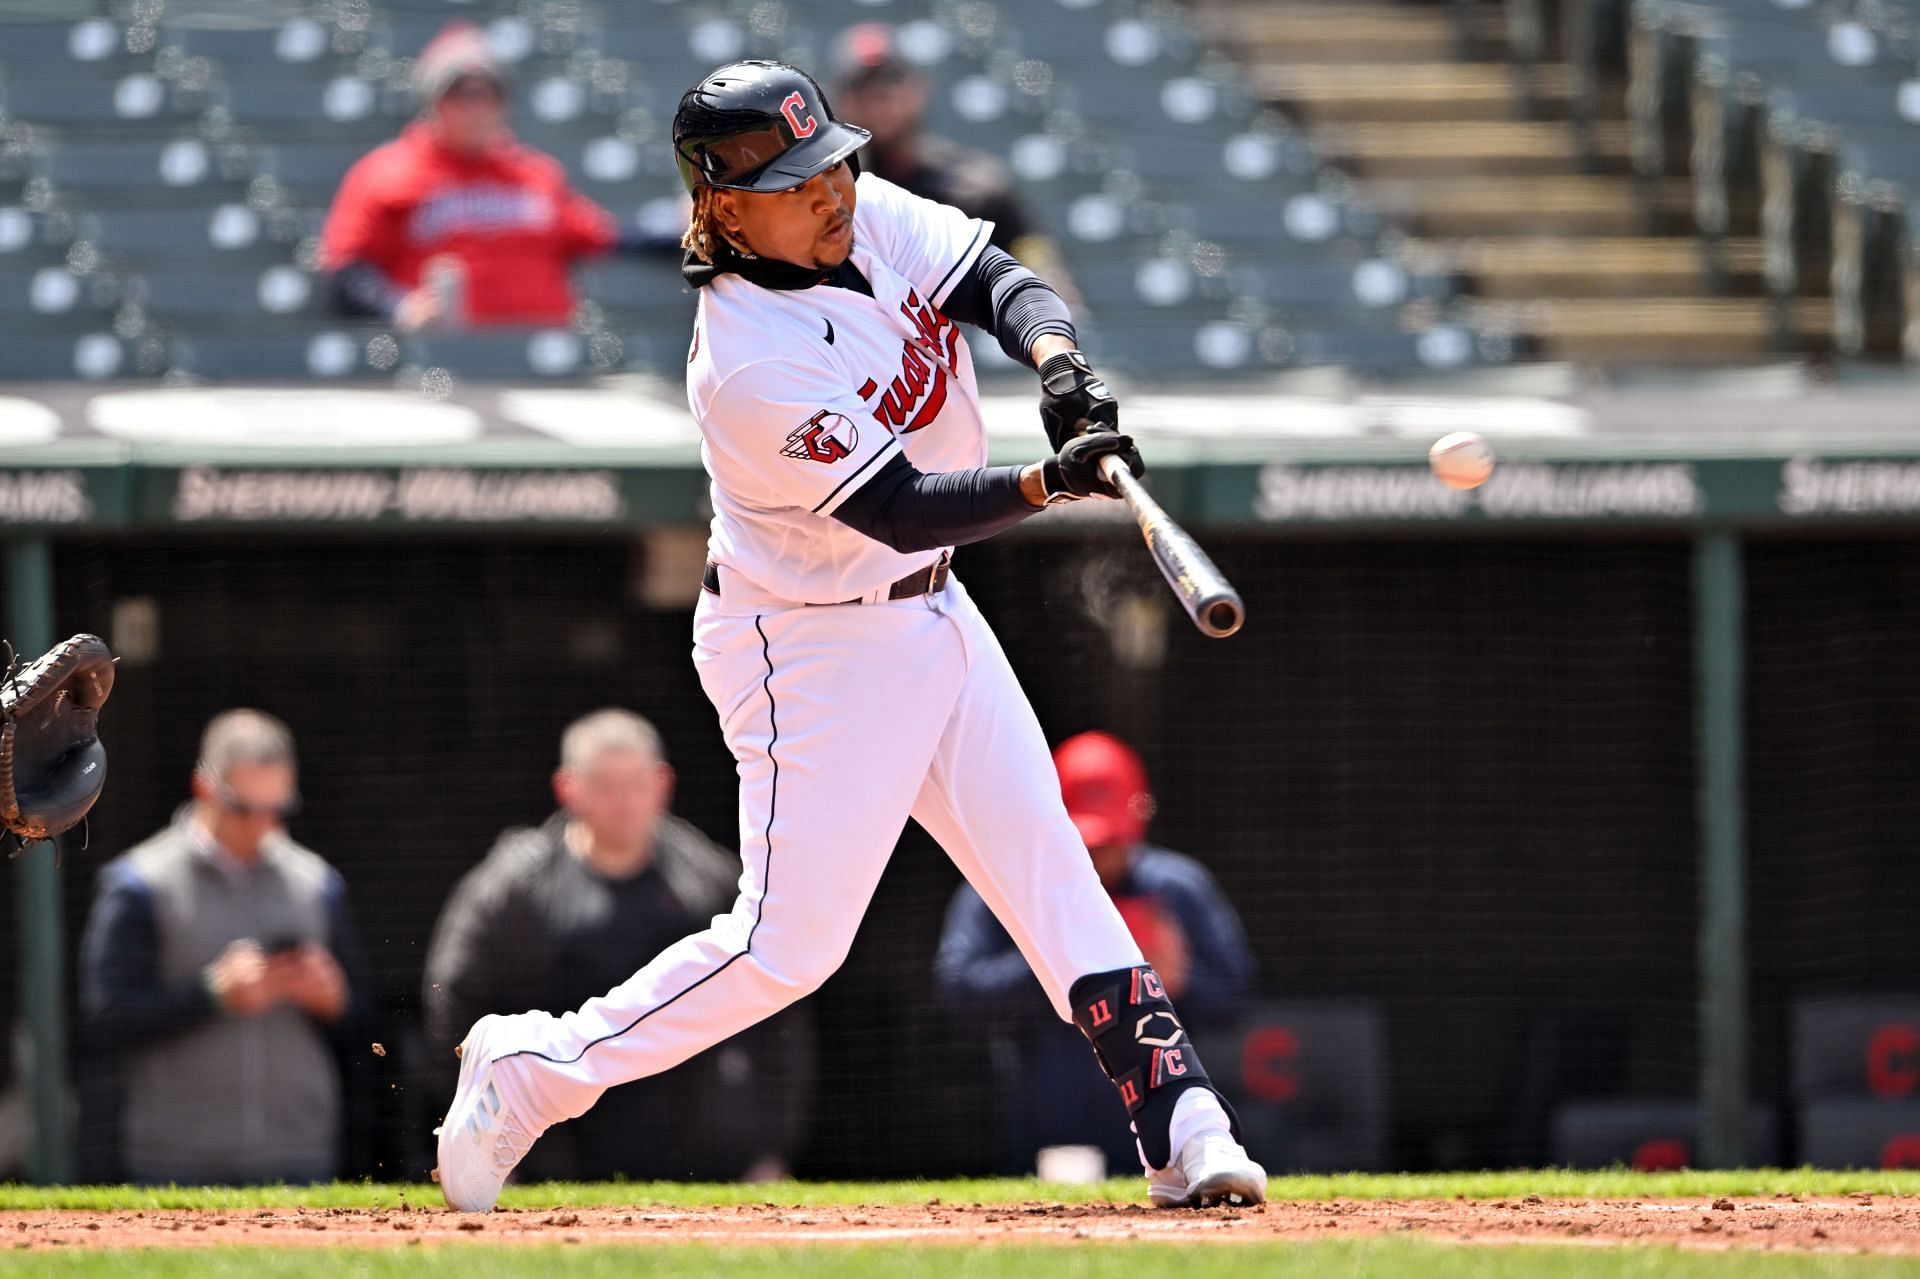 Jose Ramirez leads the MLB in RBIs currently and is poised to be a contender for AL MVP in 2022.